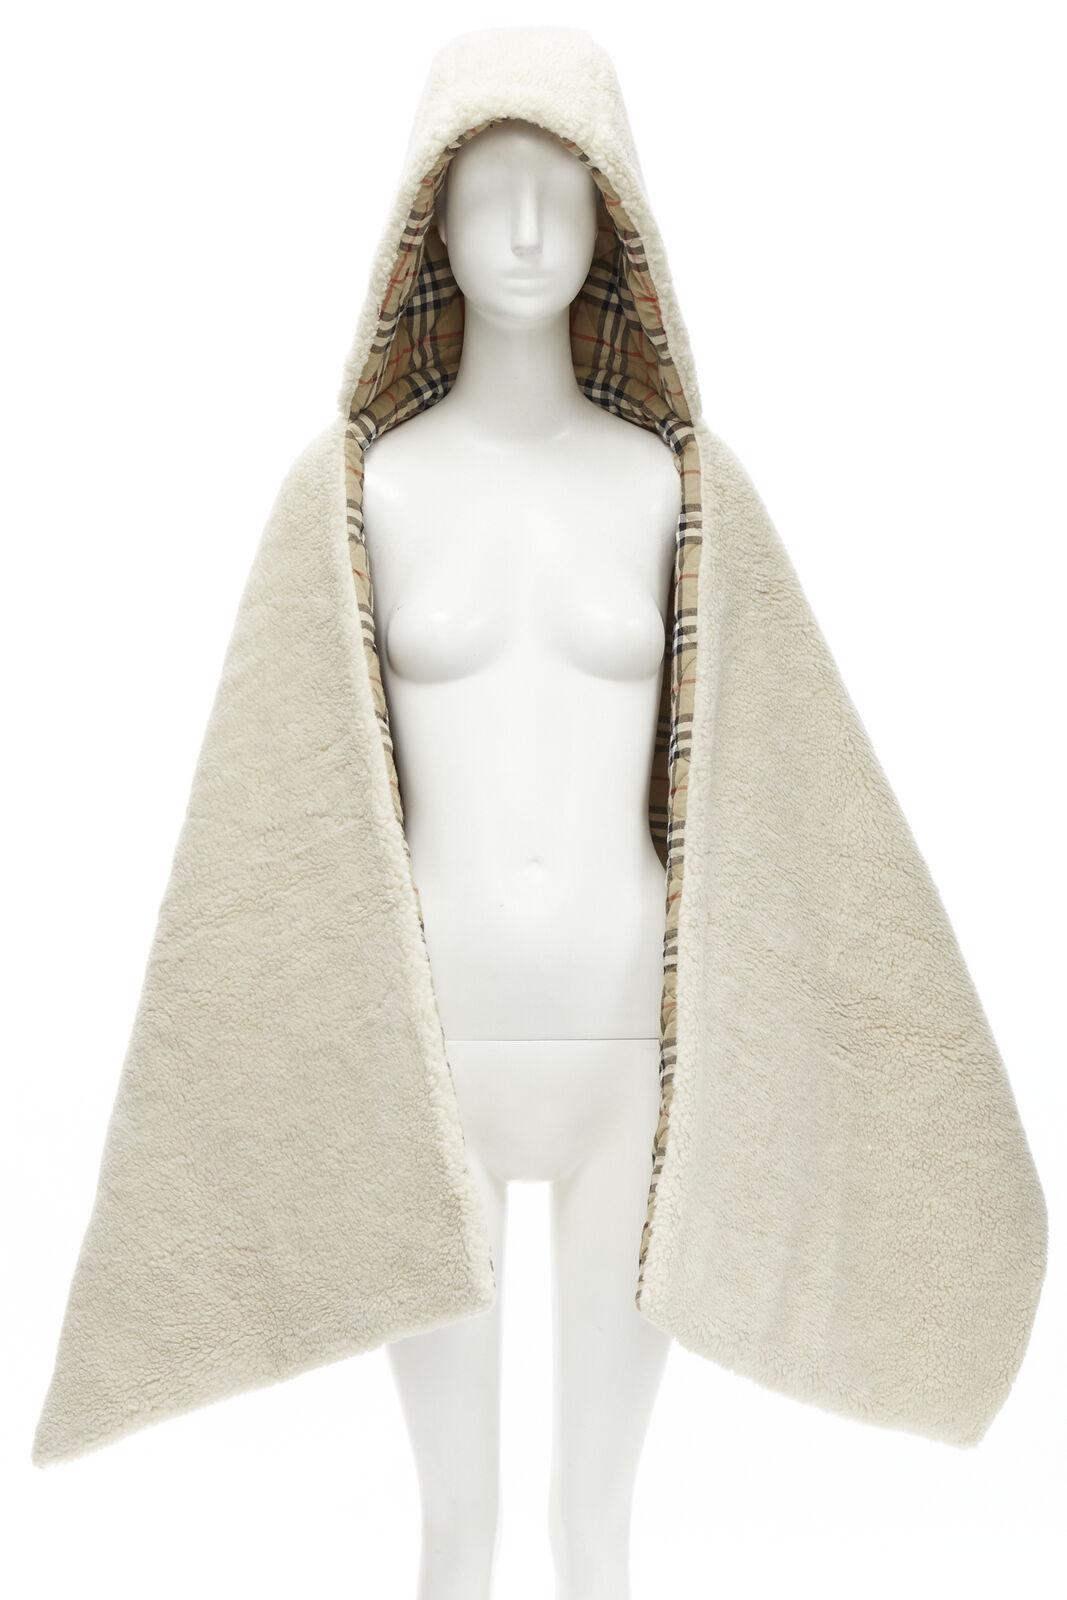 new BURBERRY RICCARDO TISCI Check flannel fleece hooded padded stole shawl
Reference: TGAS/C01551
Brand: Burberry
Designer: Riccardo Tisci
Color: Brown, Cream
Pattern: Checkered
Extra Details: Reversible. Padded House Check cotton with quilting